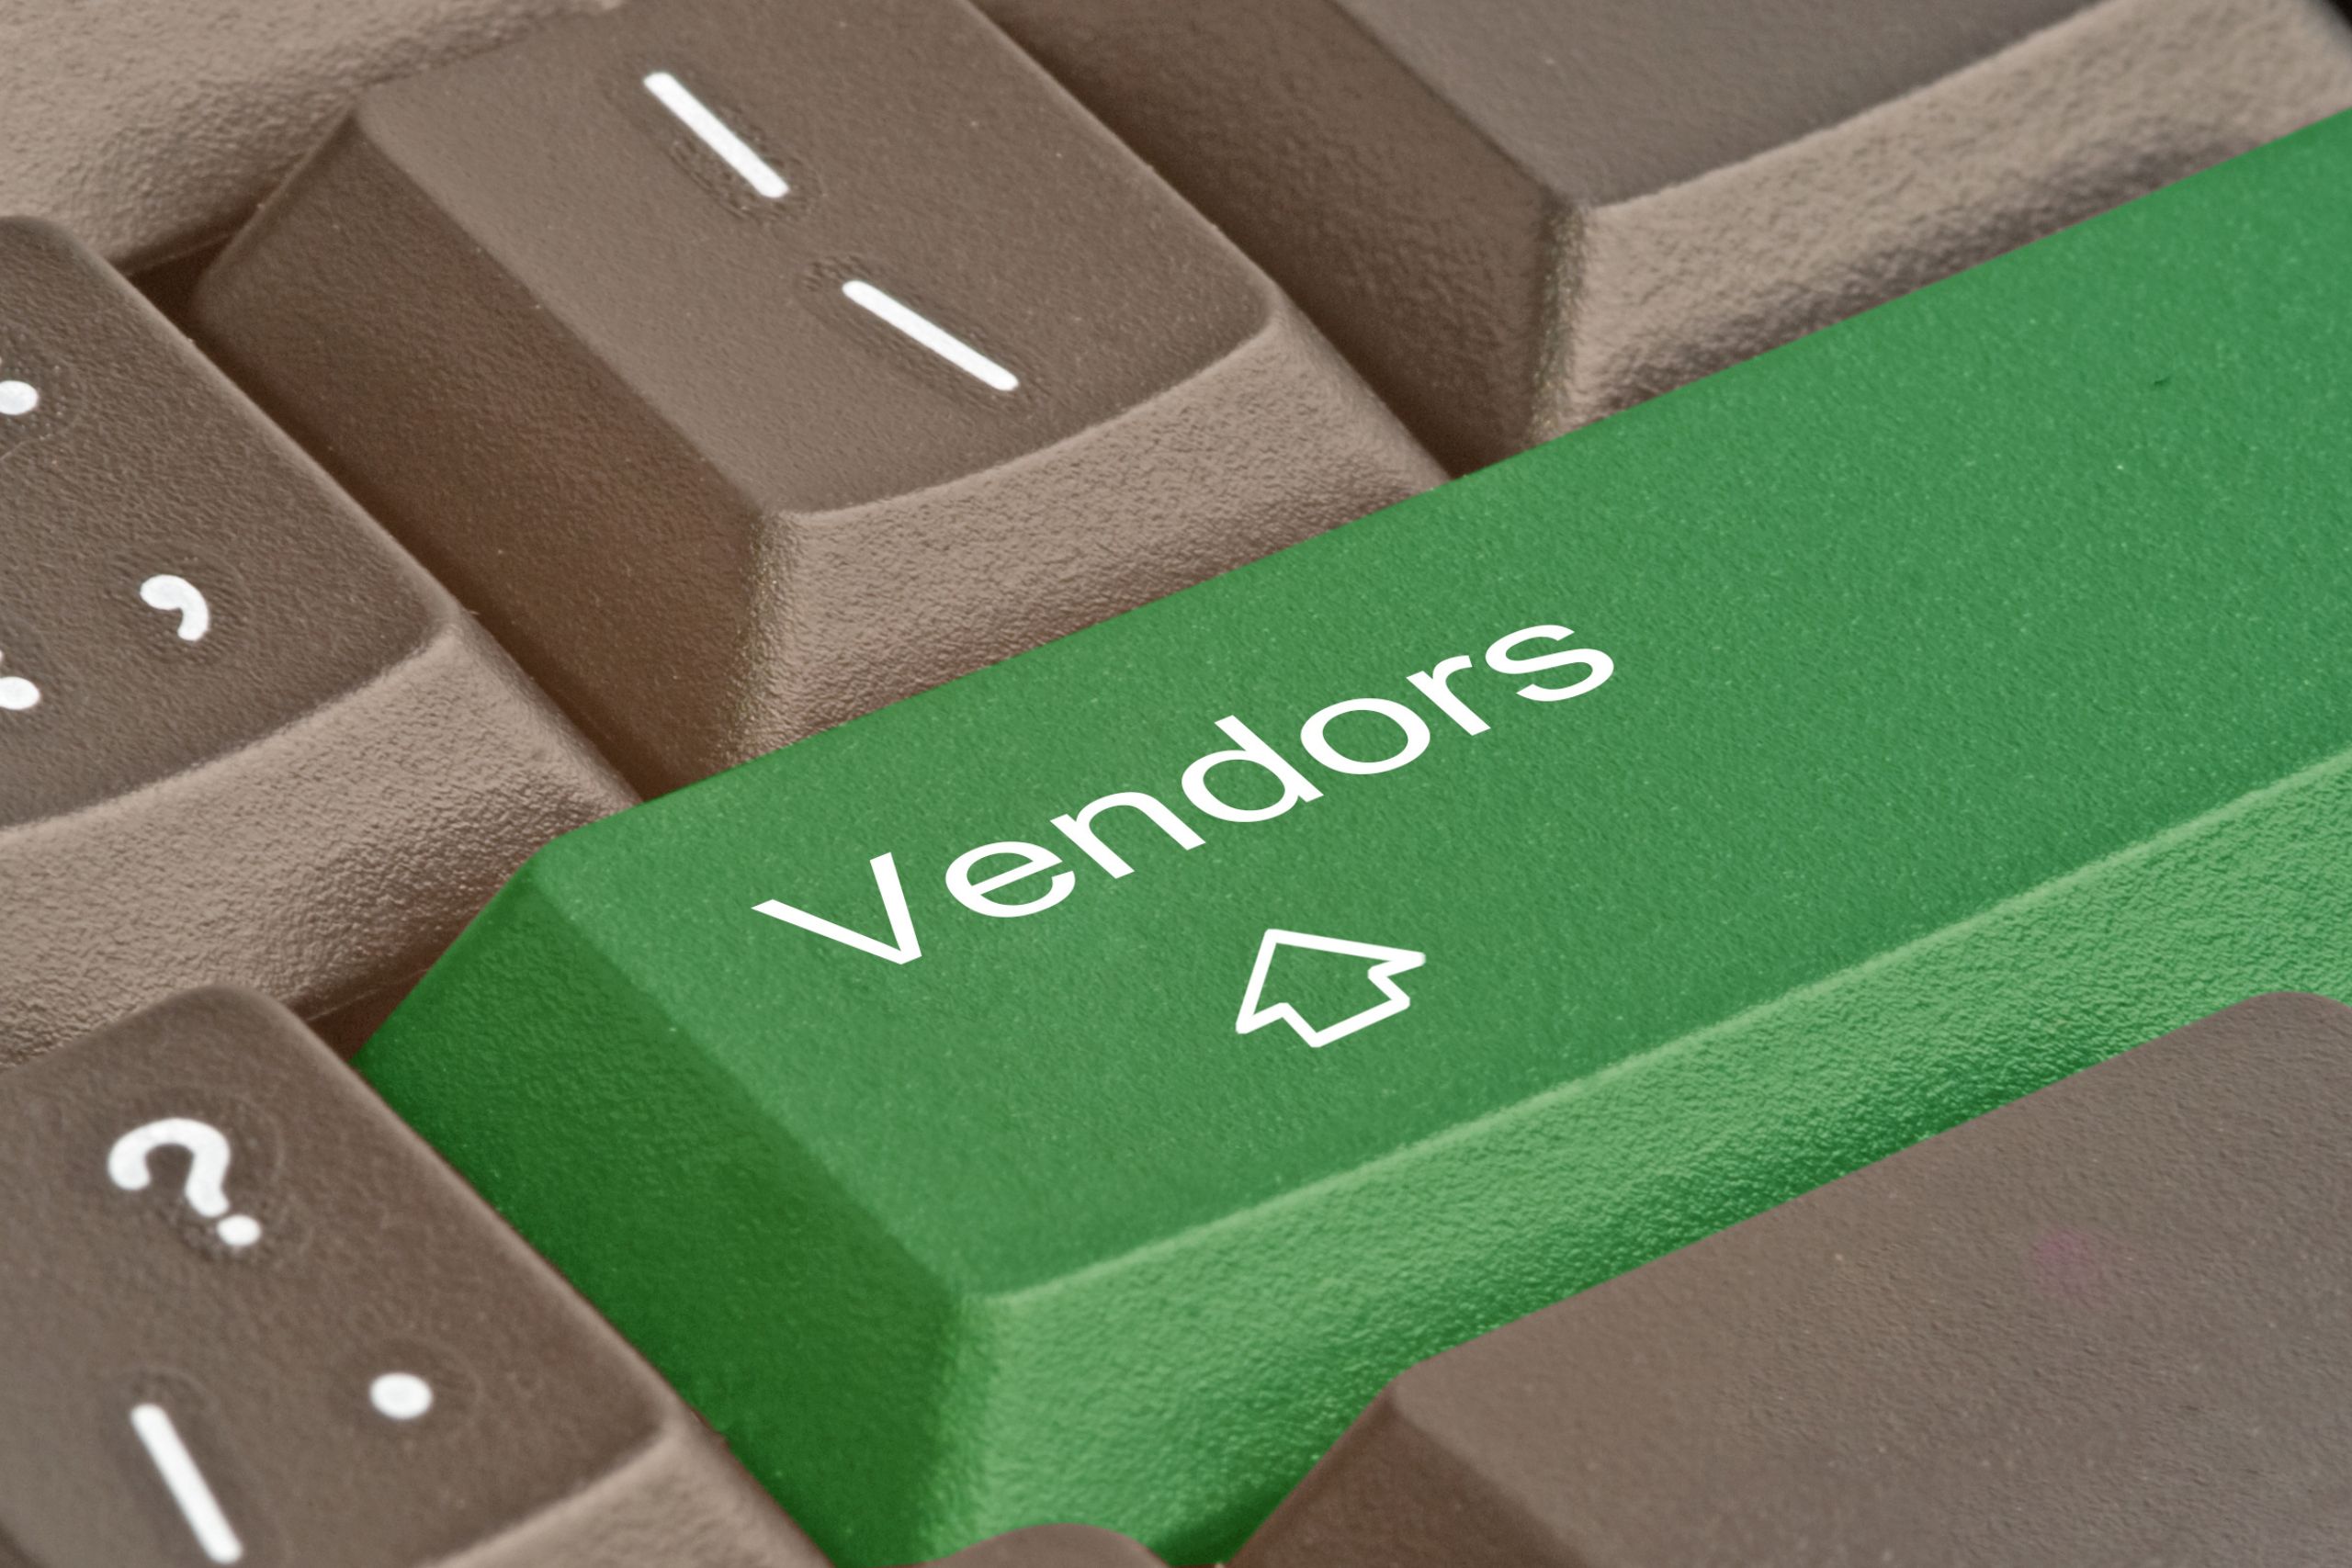 A green button with the word Vendors indicating a click for vendor risk assessments